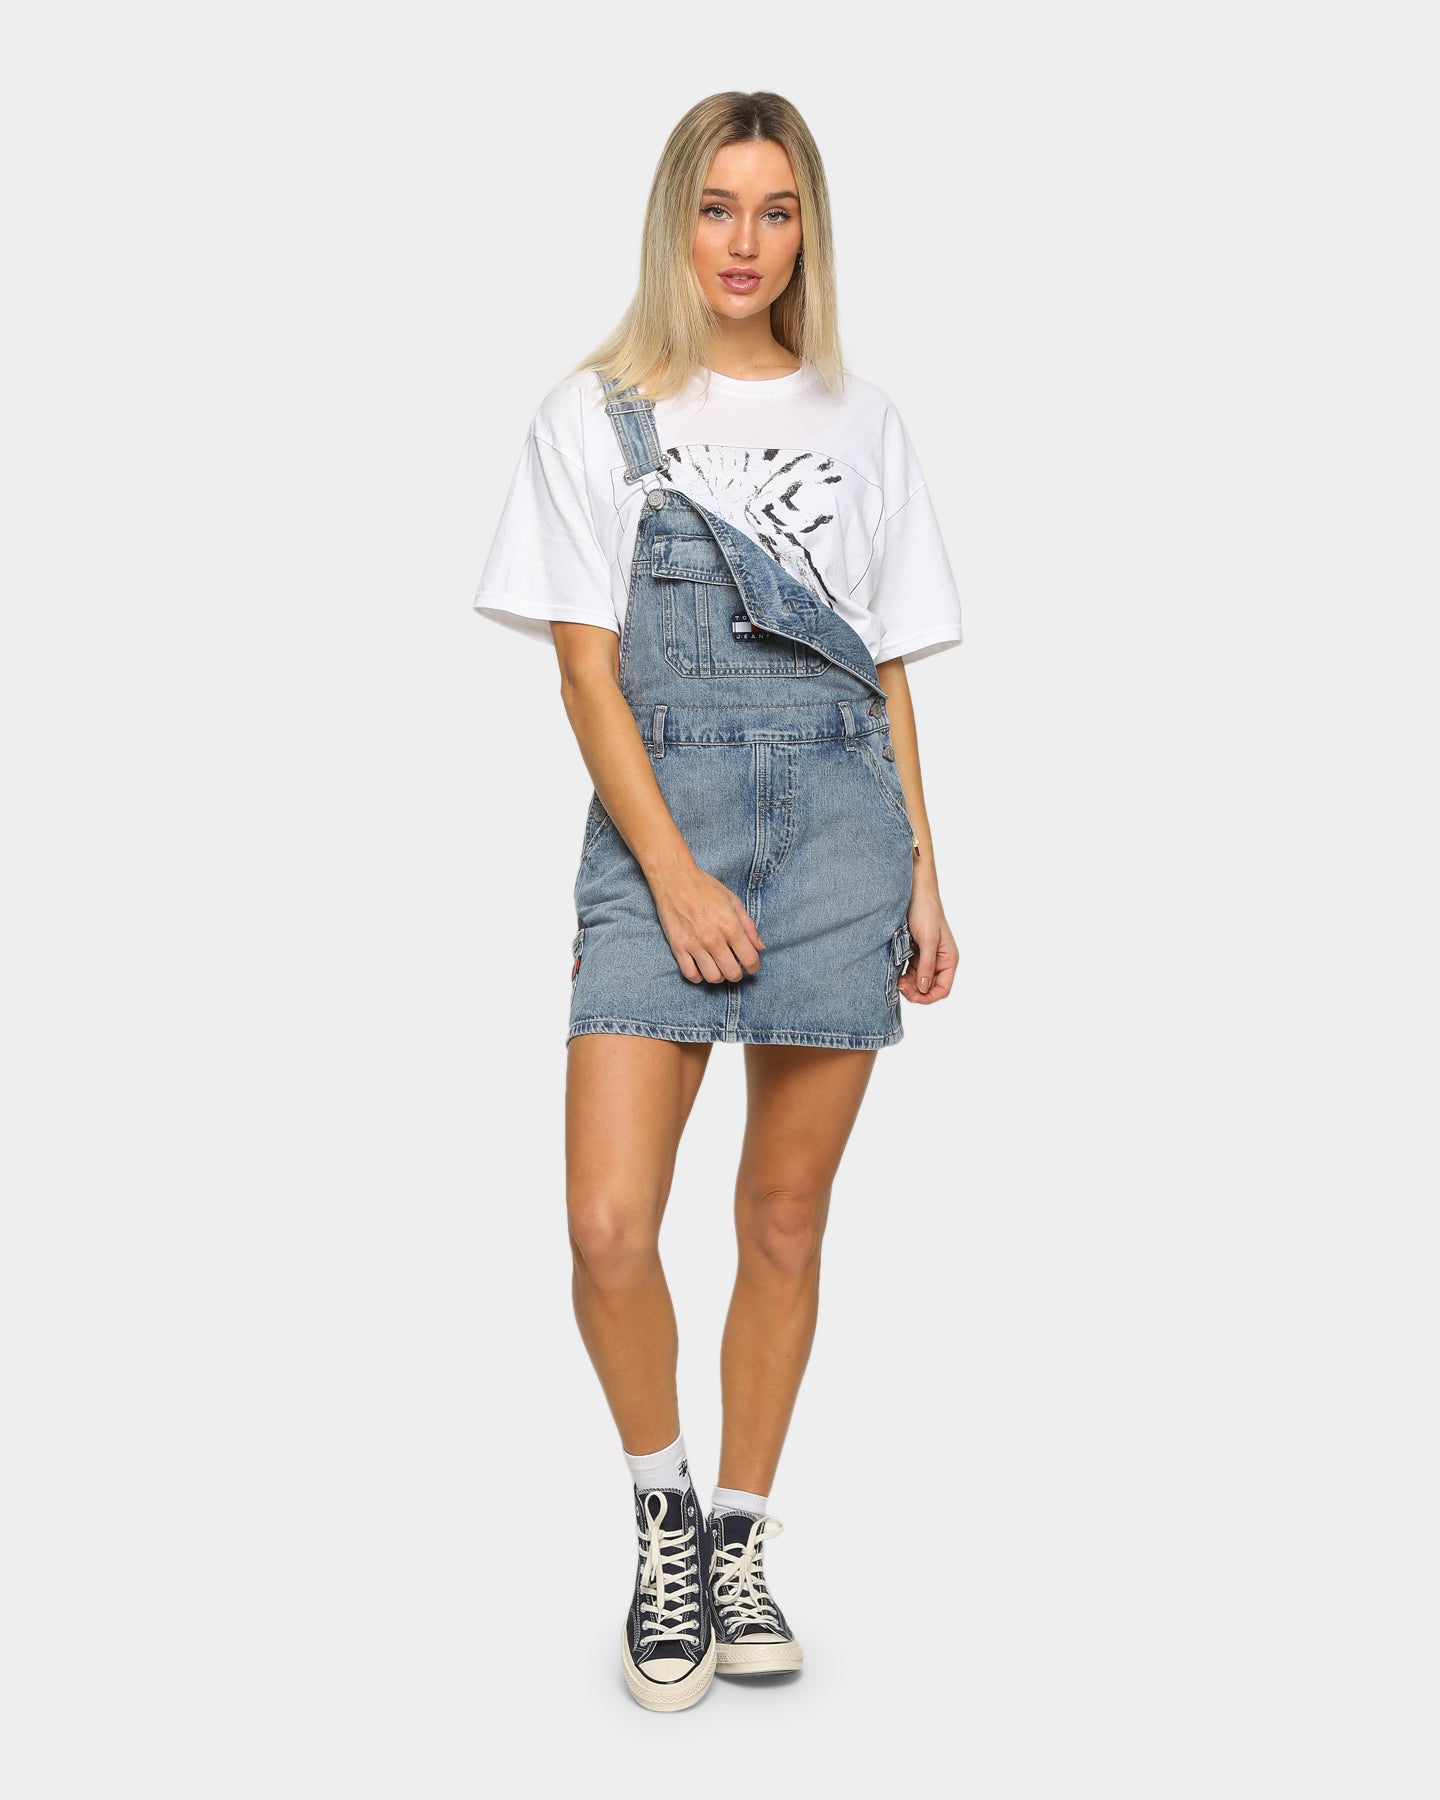 fitted dungaree dress